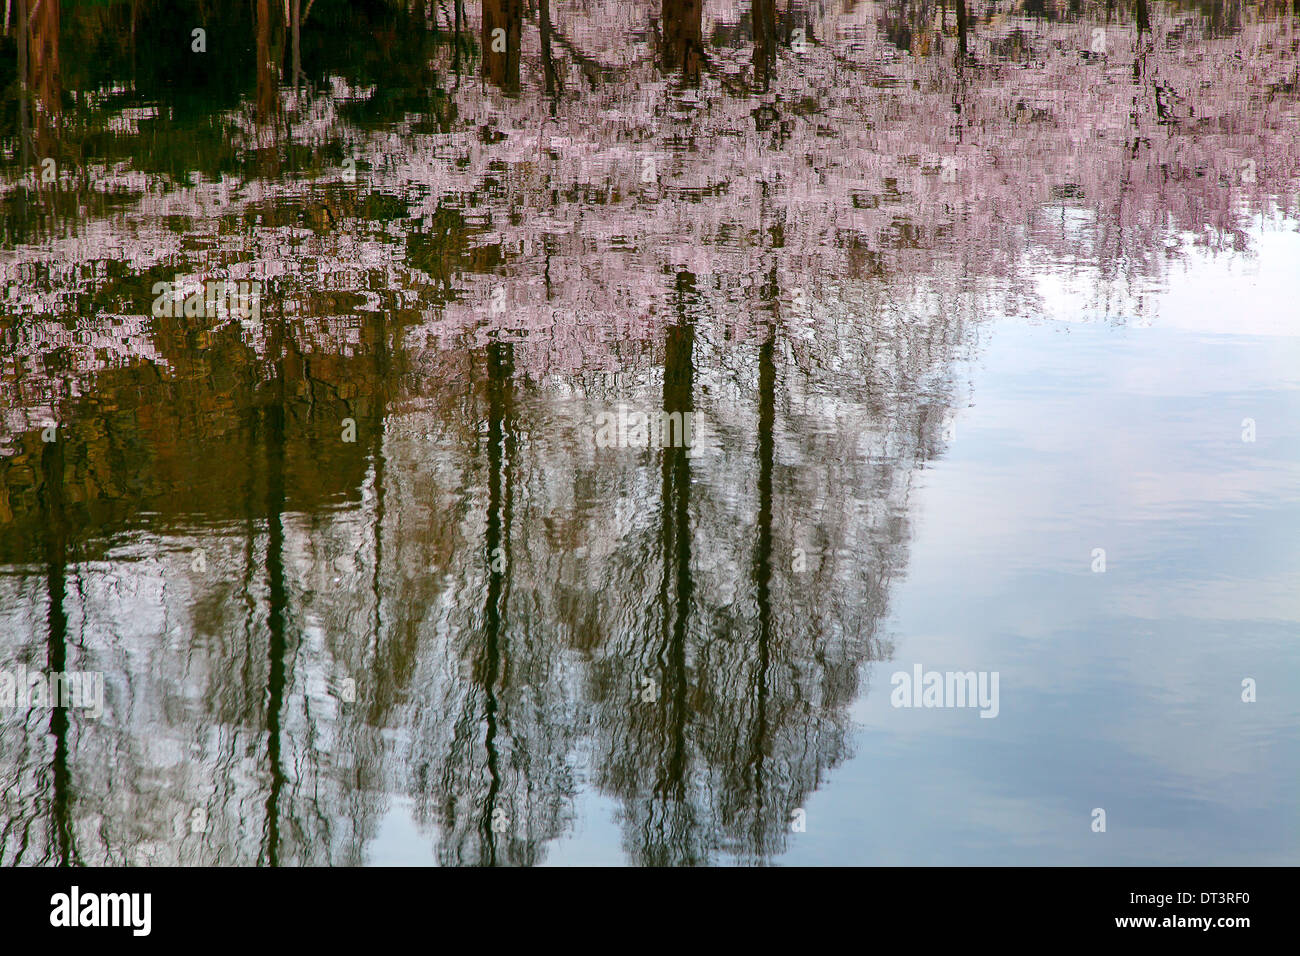 Nice reflection scenery of cherry blossom trees along the pathway in springtime, Osaka Japan Stock Photo